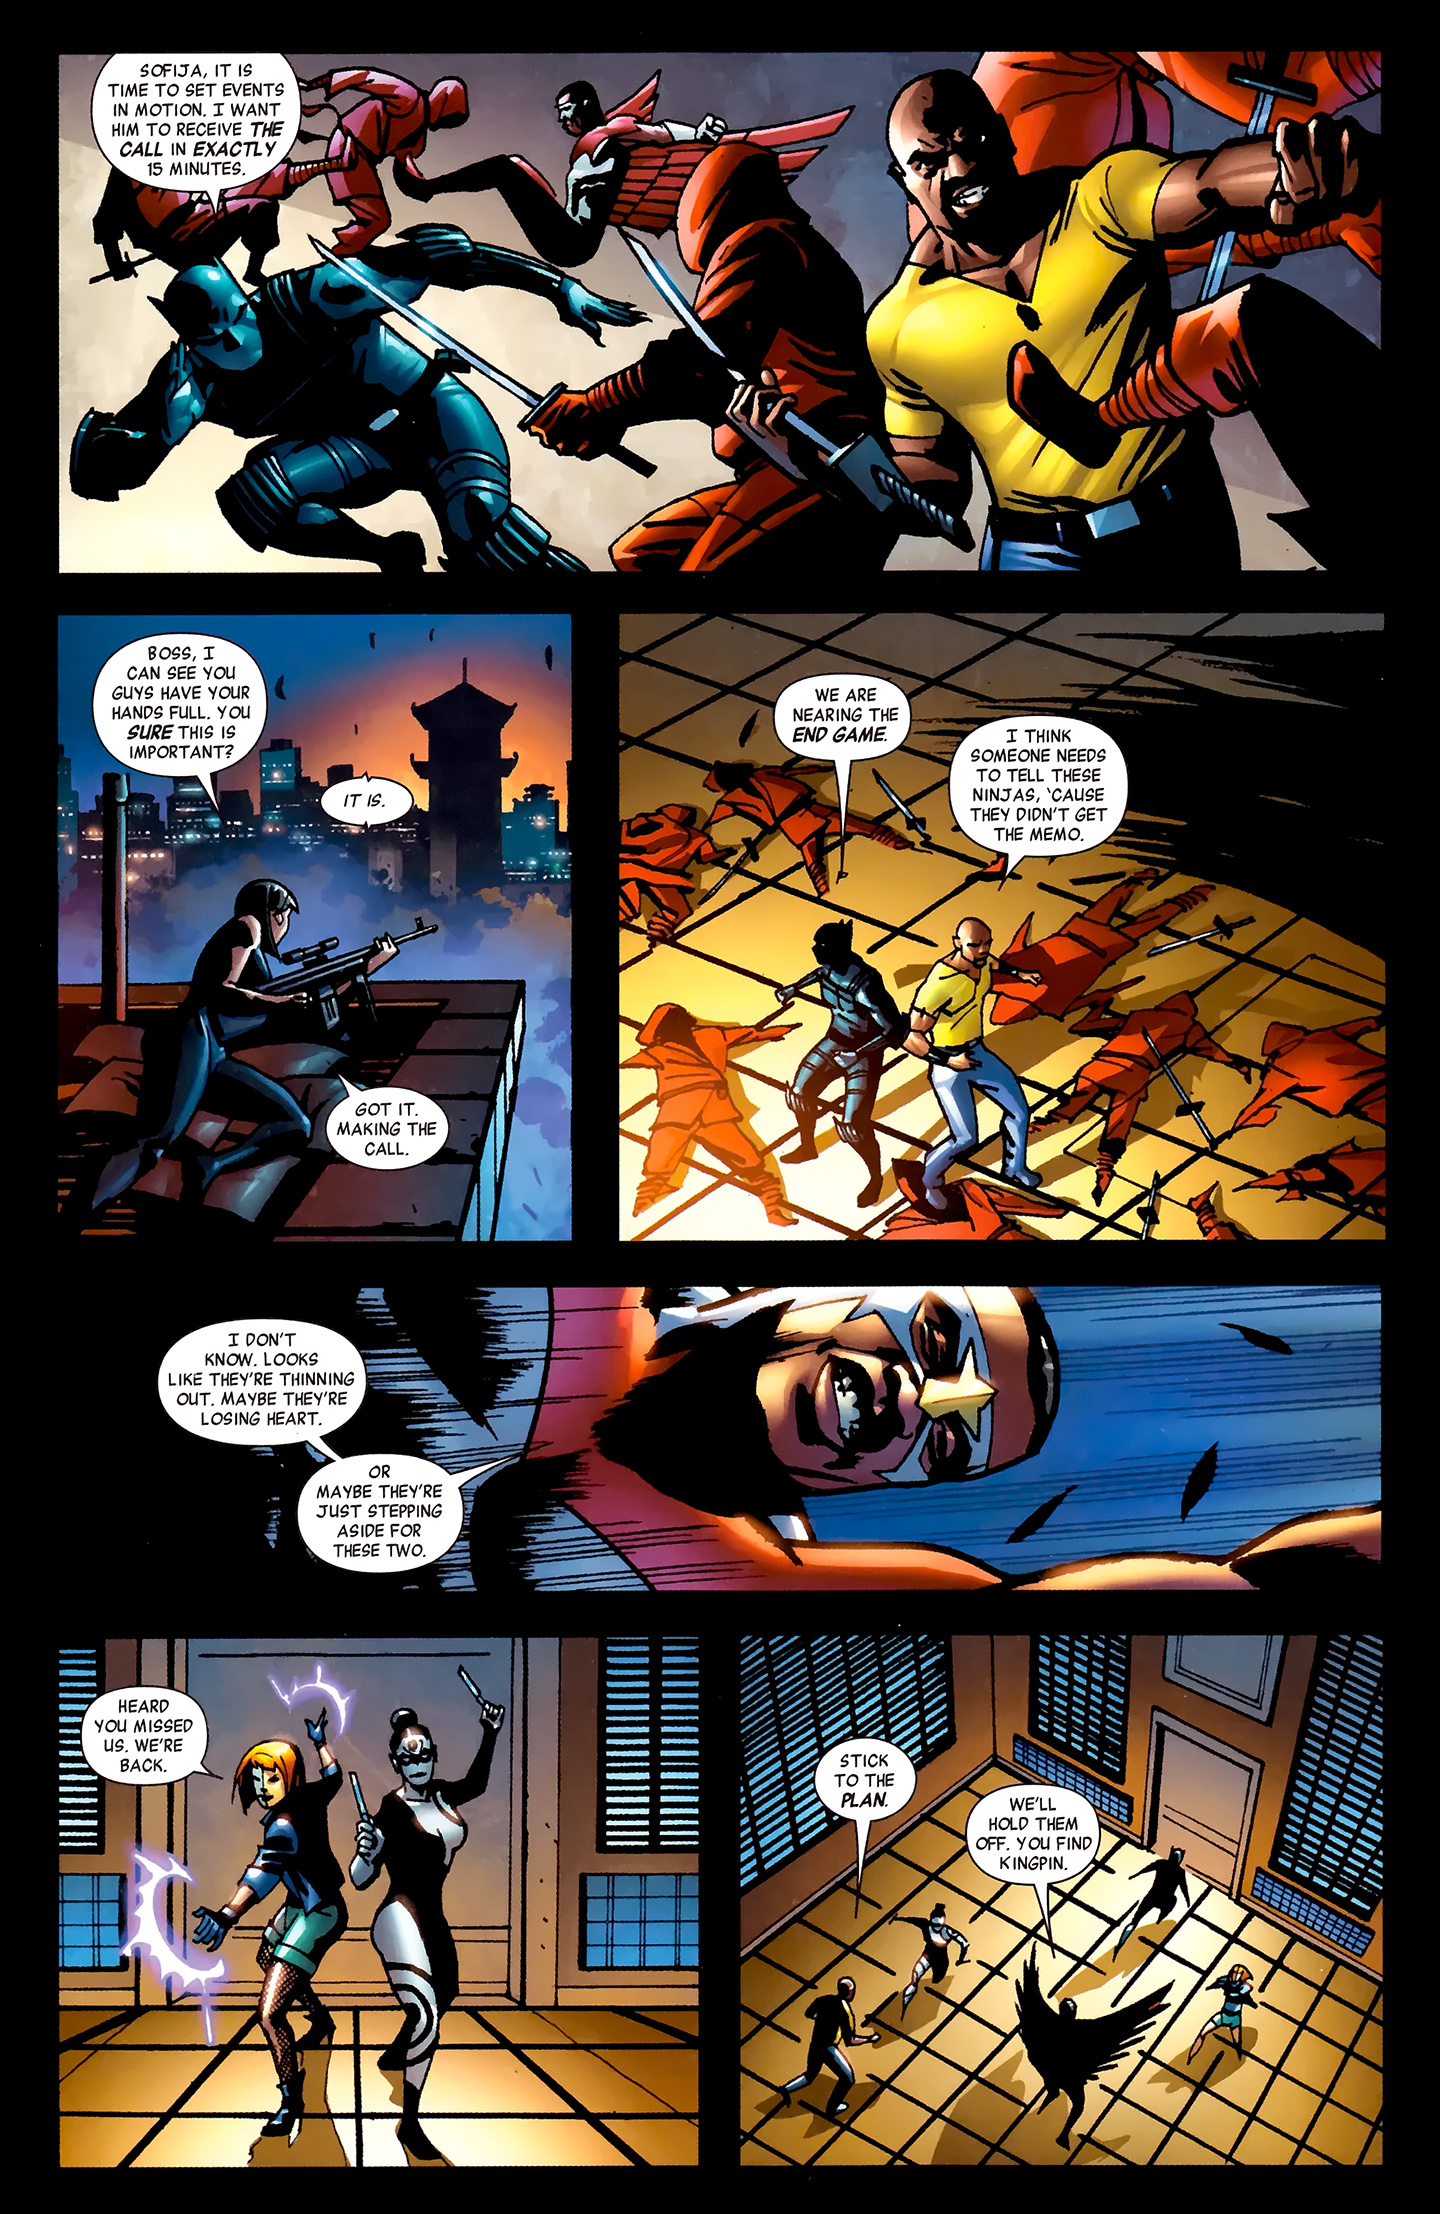 Black Panther: The Most Dangerous Man Alive 529 Page 5